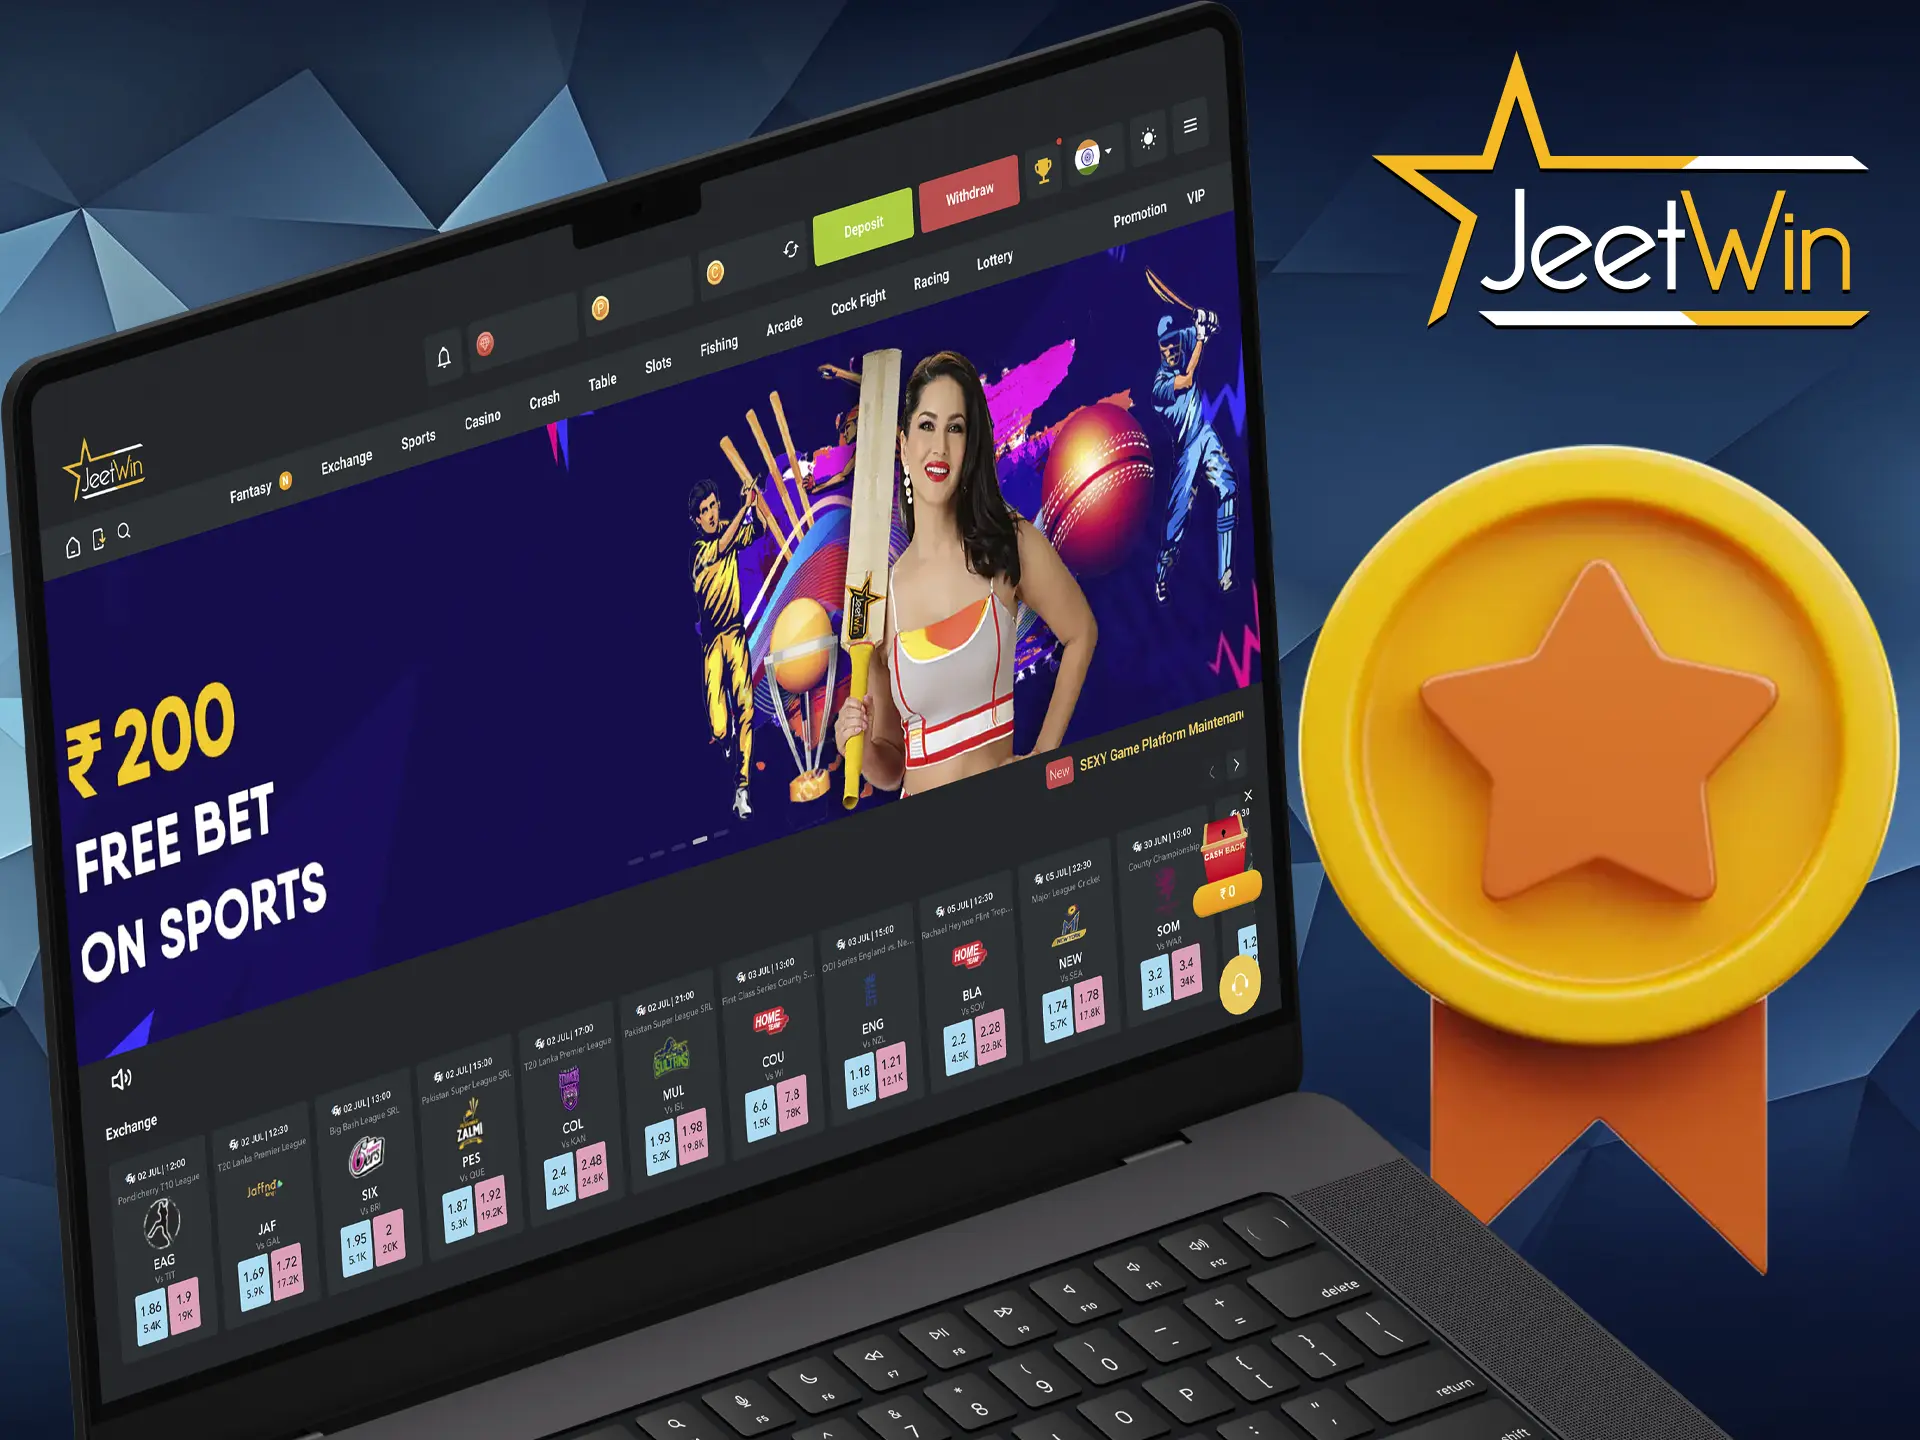 Jeetwin is widely regarded as one of the best bookmakers for cricket betting.